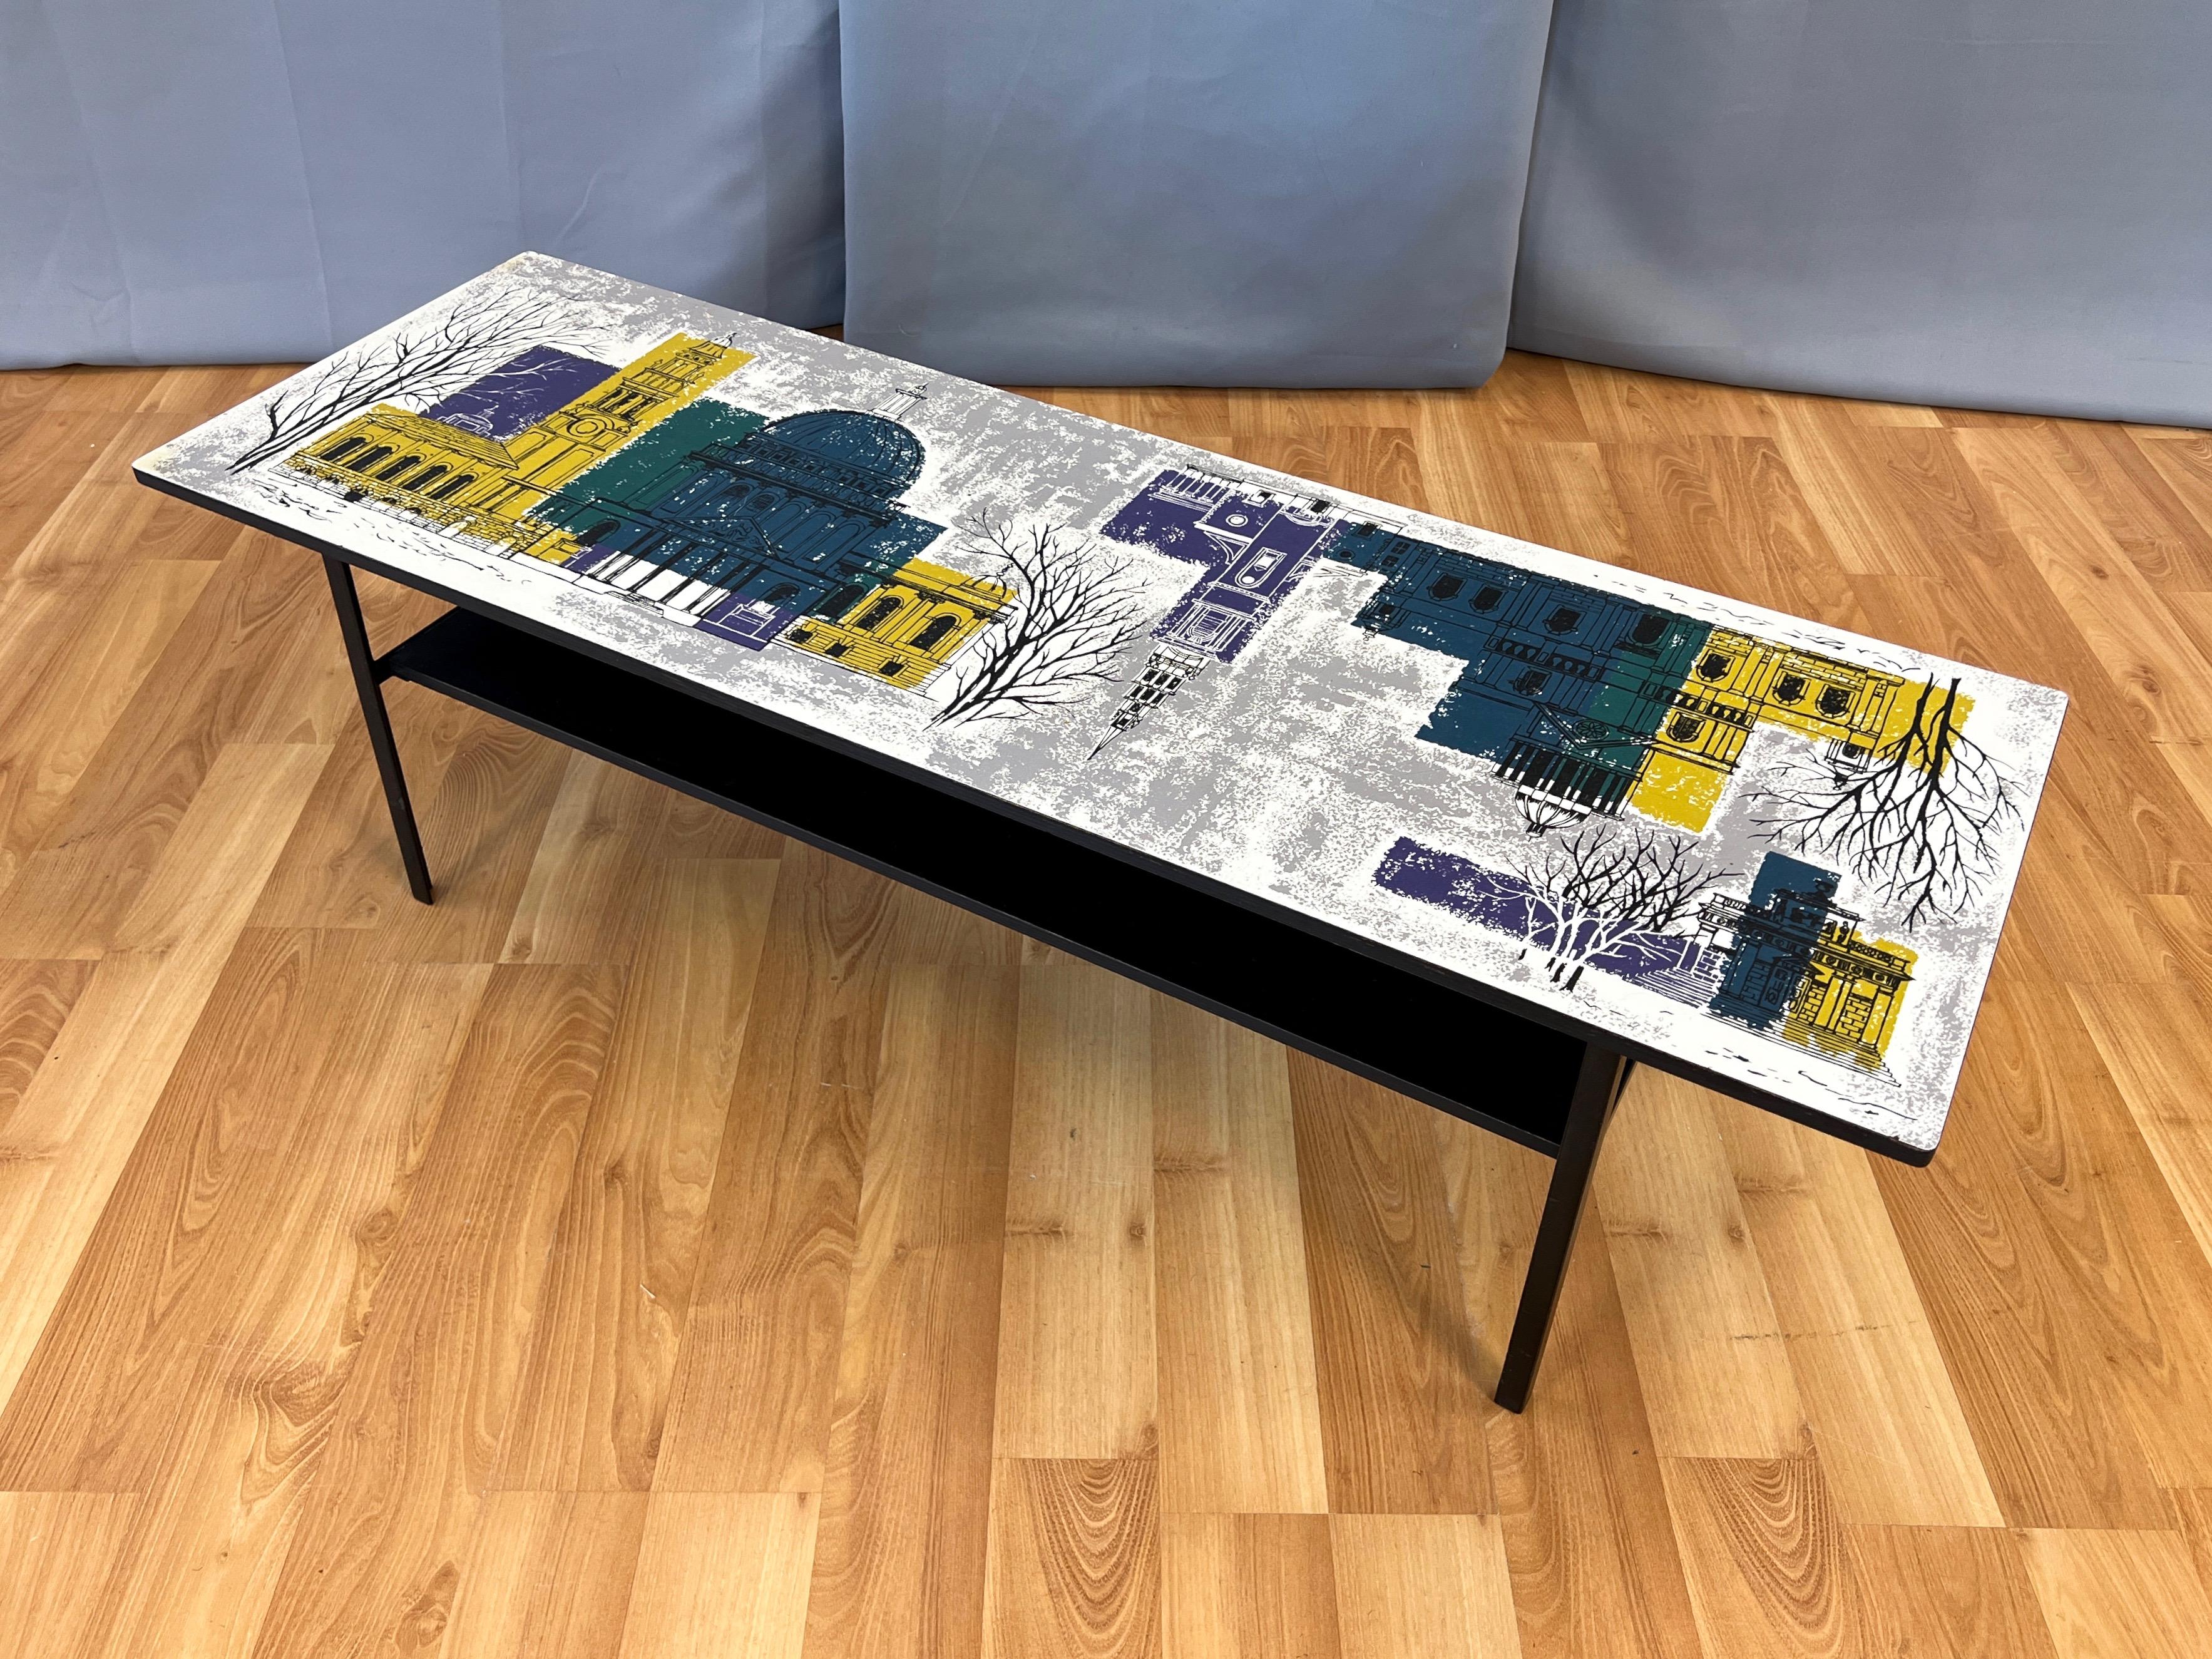 A very charming circa 1960 two-tier low coffee table featuring an illustrated London skyline top by John Piper, and produced by Myer for Conran and Heal’s.

White formica top serves as an expansive canvas for important UK painter, printmaker, and